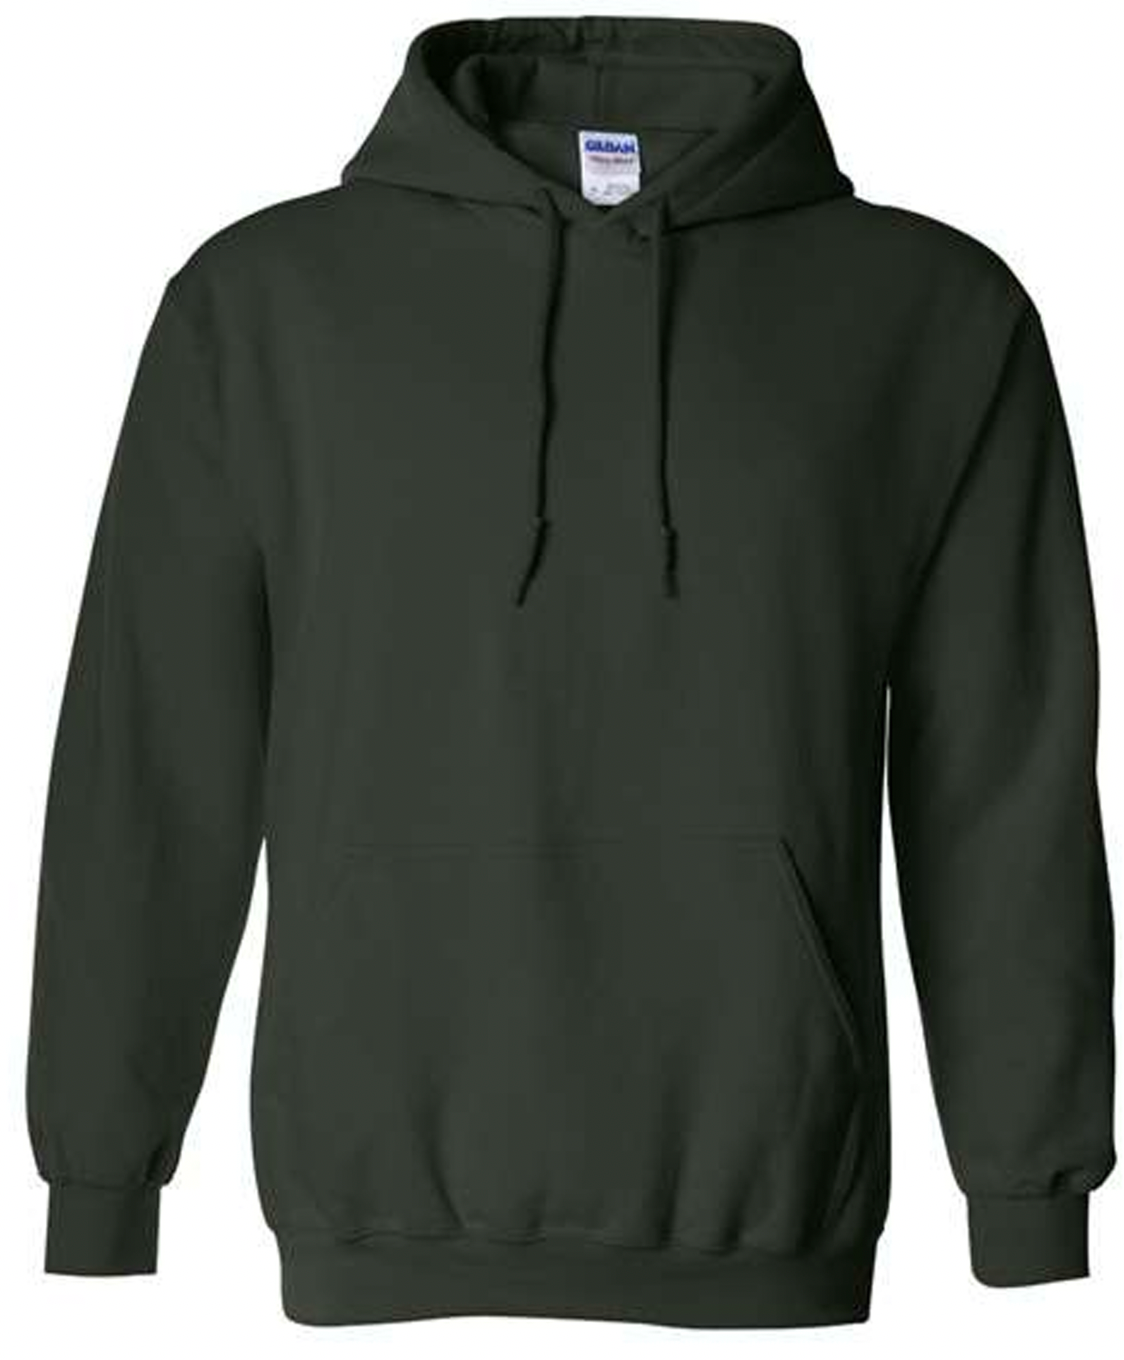 Left Chest Logo - Integrated Services Hoodies